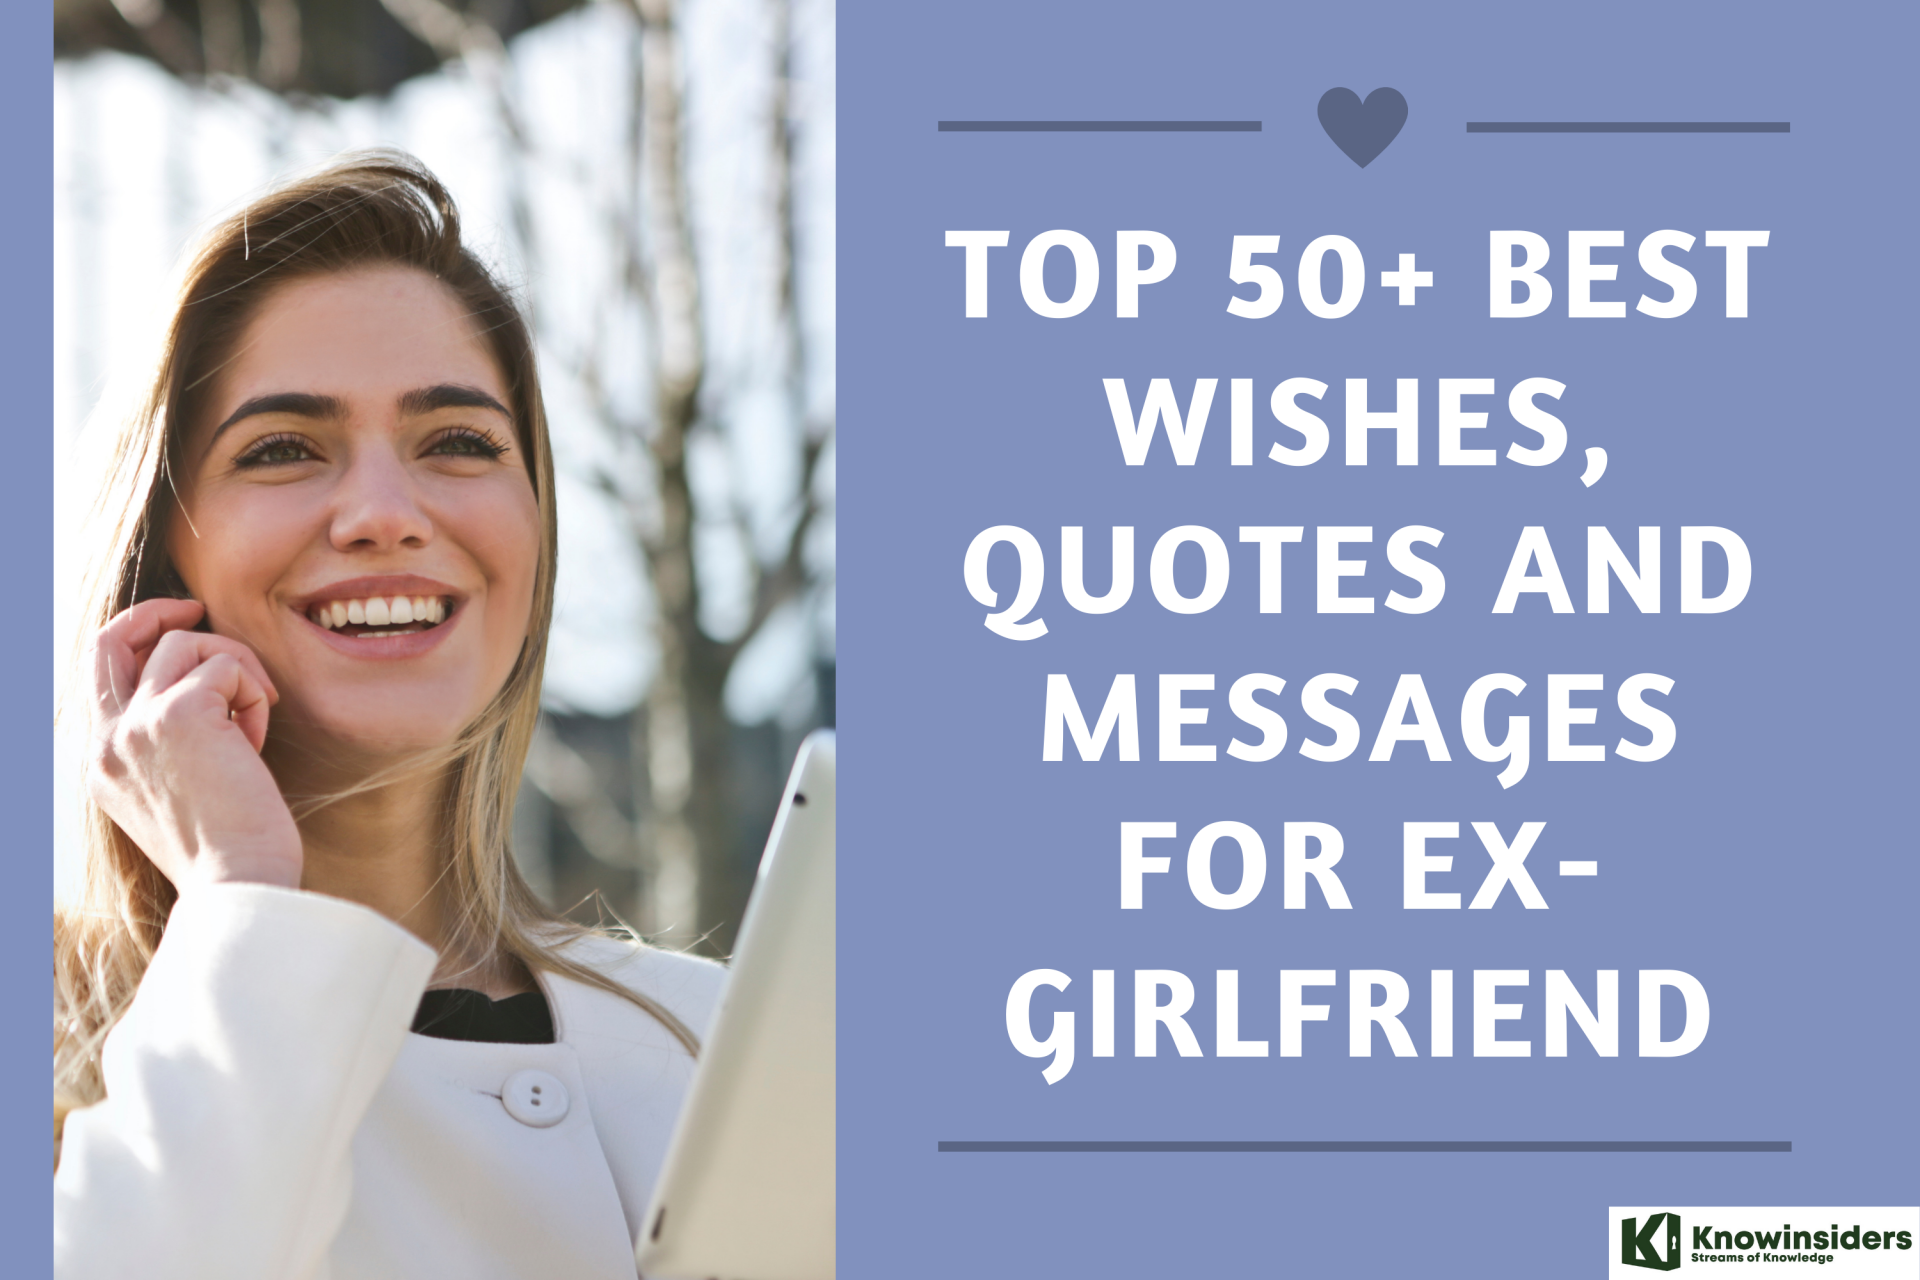 Top 50+ Best Quotes and Messages for Ex-Girlfriend